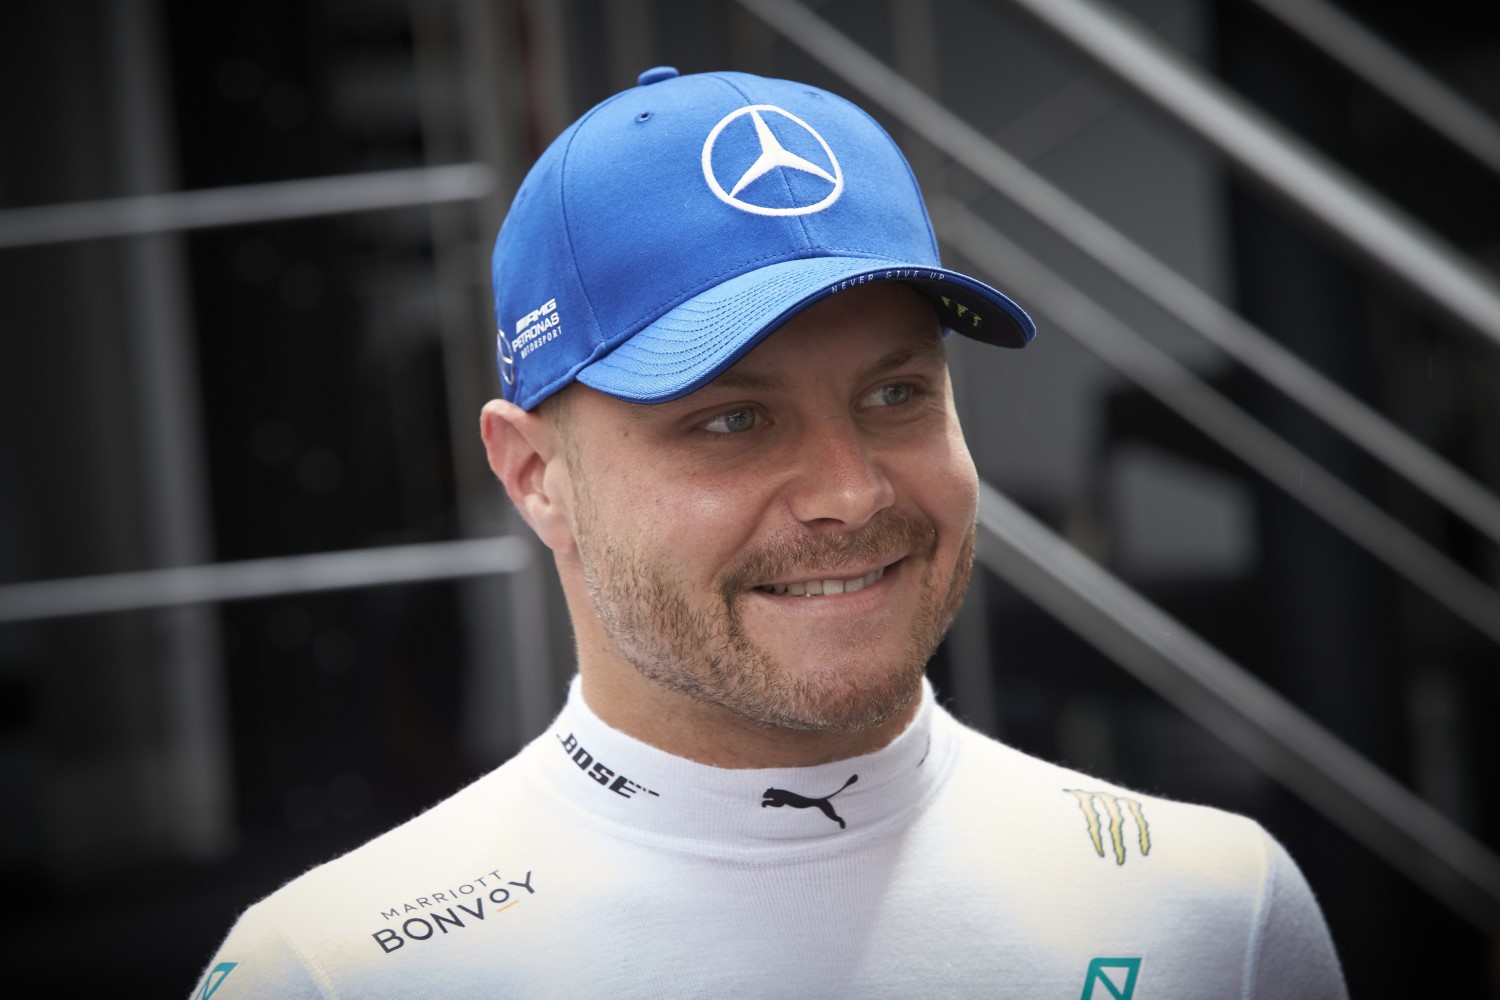 Valtteri Bottas was smiling in Hungary. Not for long.